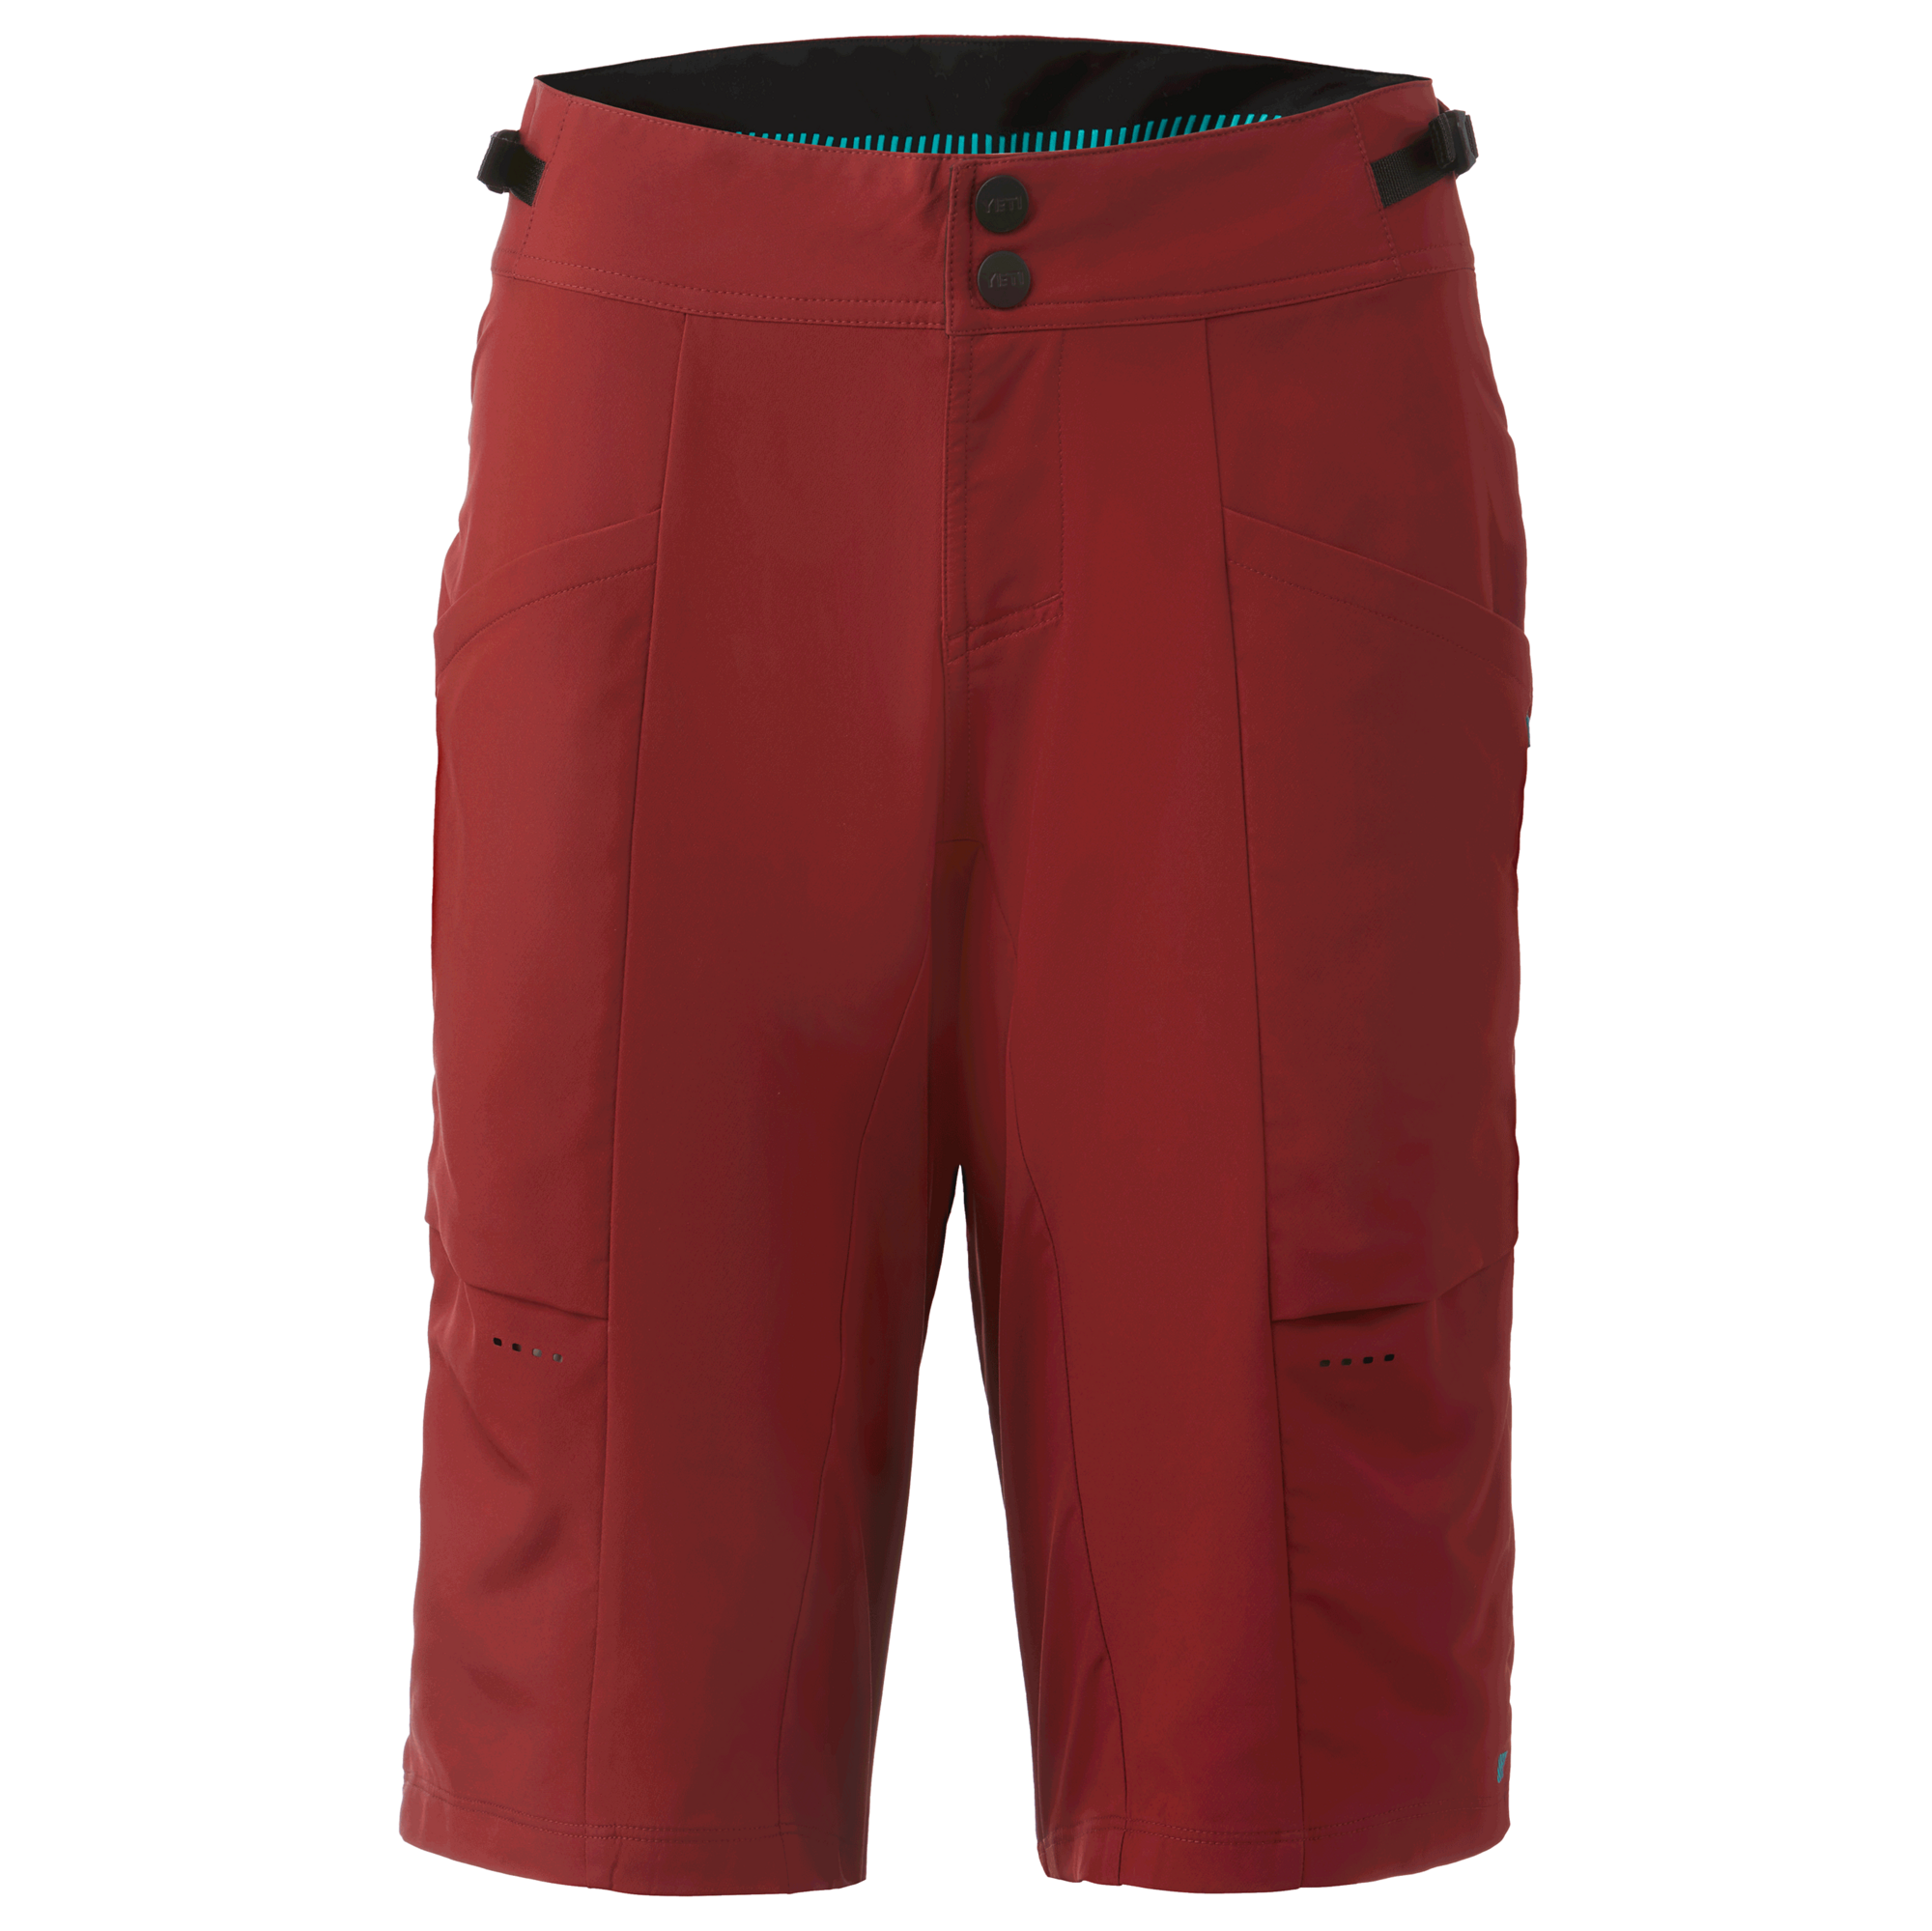 https://www.sefiles.net/images/library/zoom/yeti-cycles-women's-norrie-short--455380-3355594-1.png